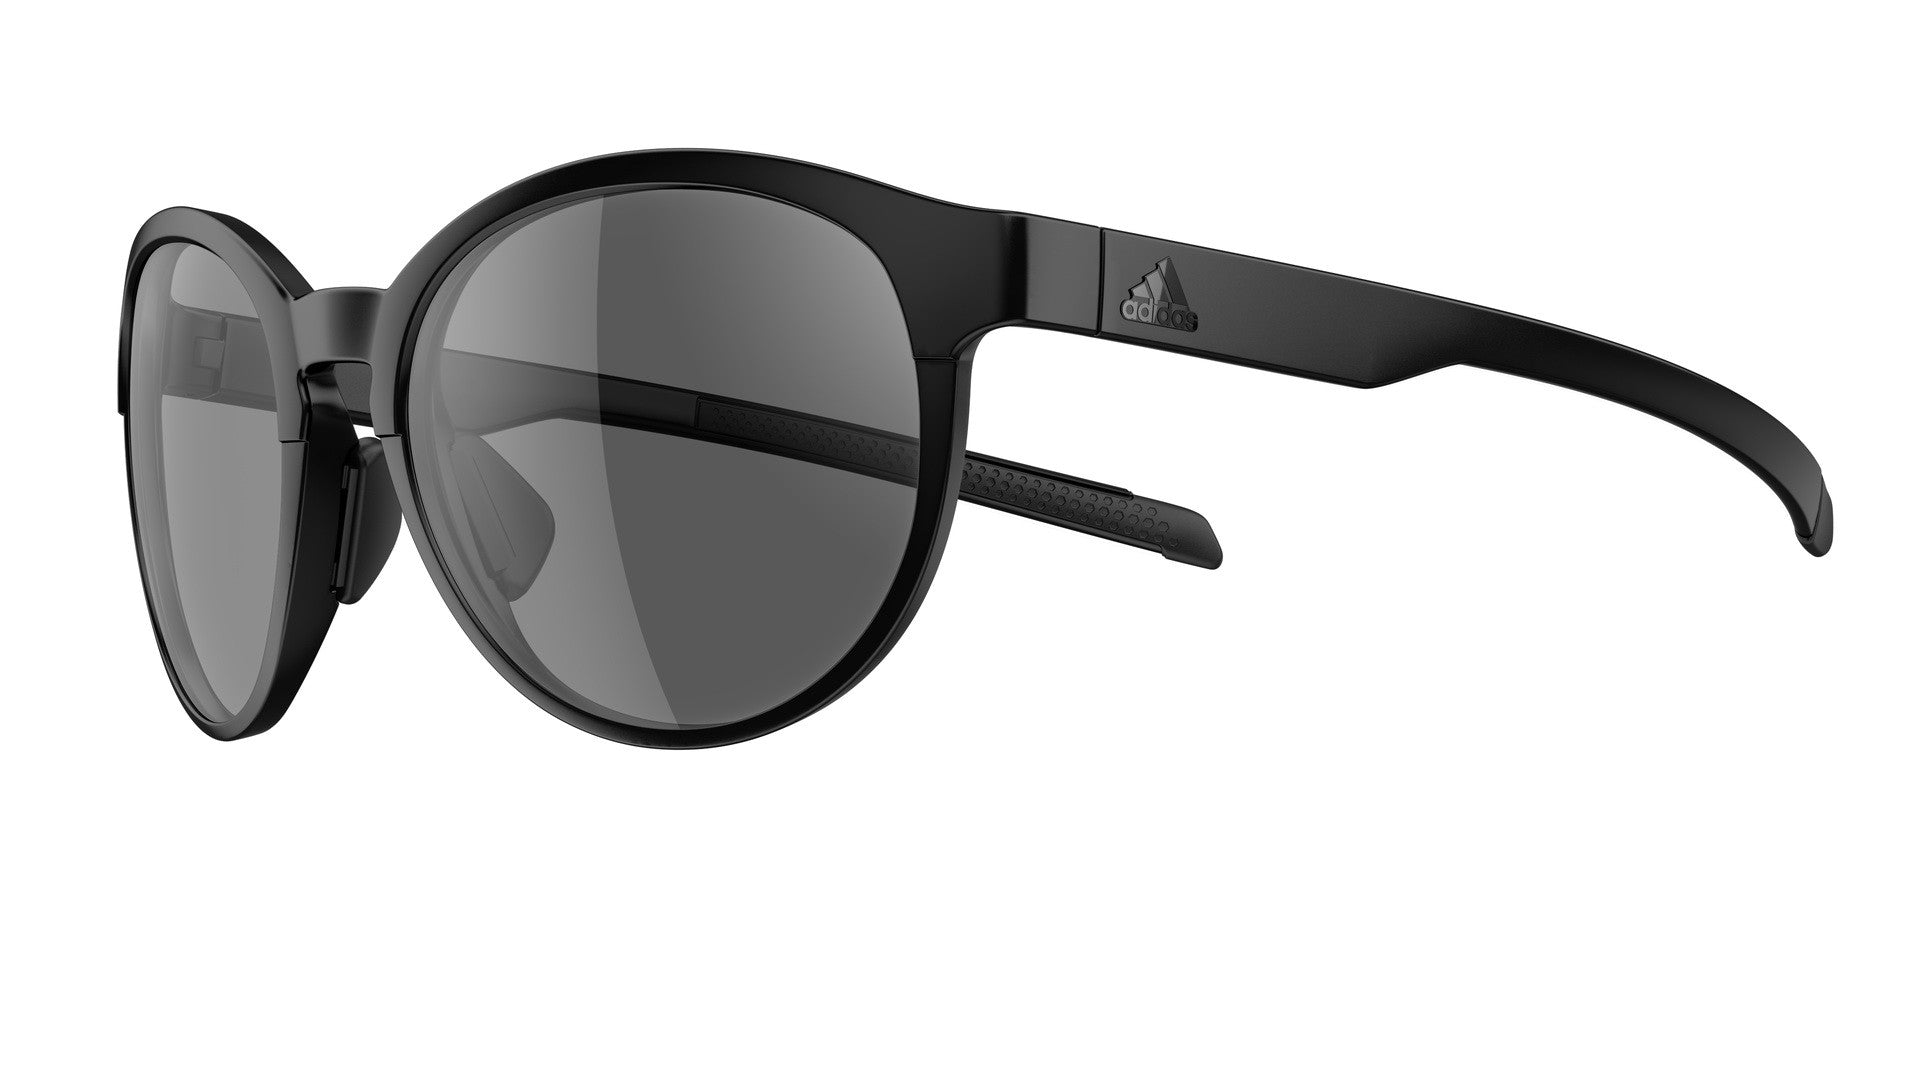 Silhouette Beyonder Sunglasses AD31 rx chassis - Go-Readers.com